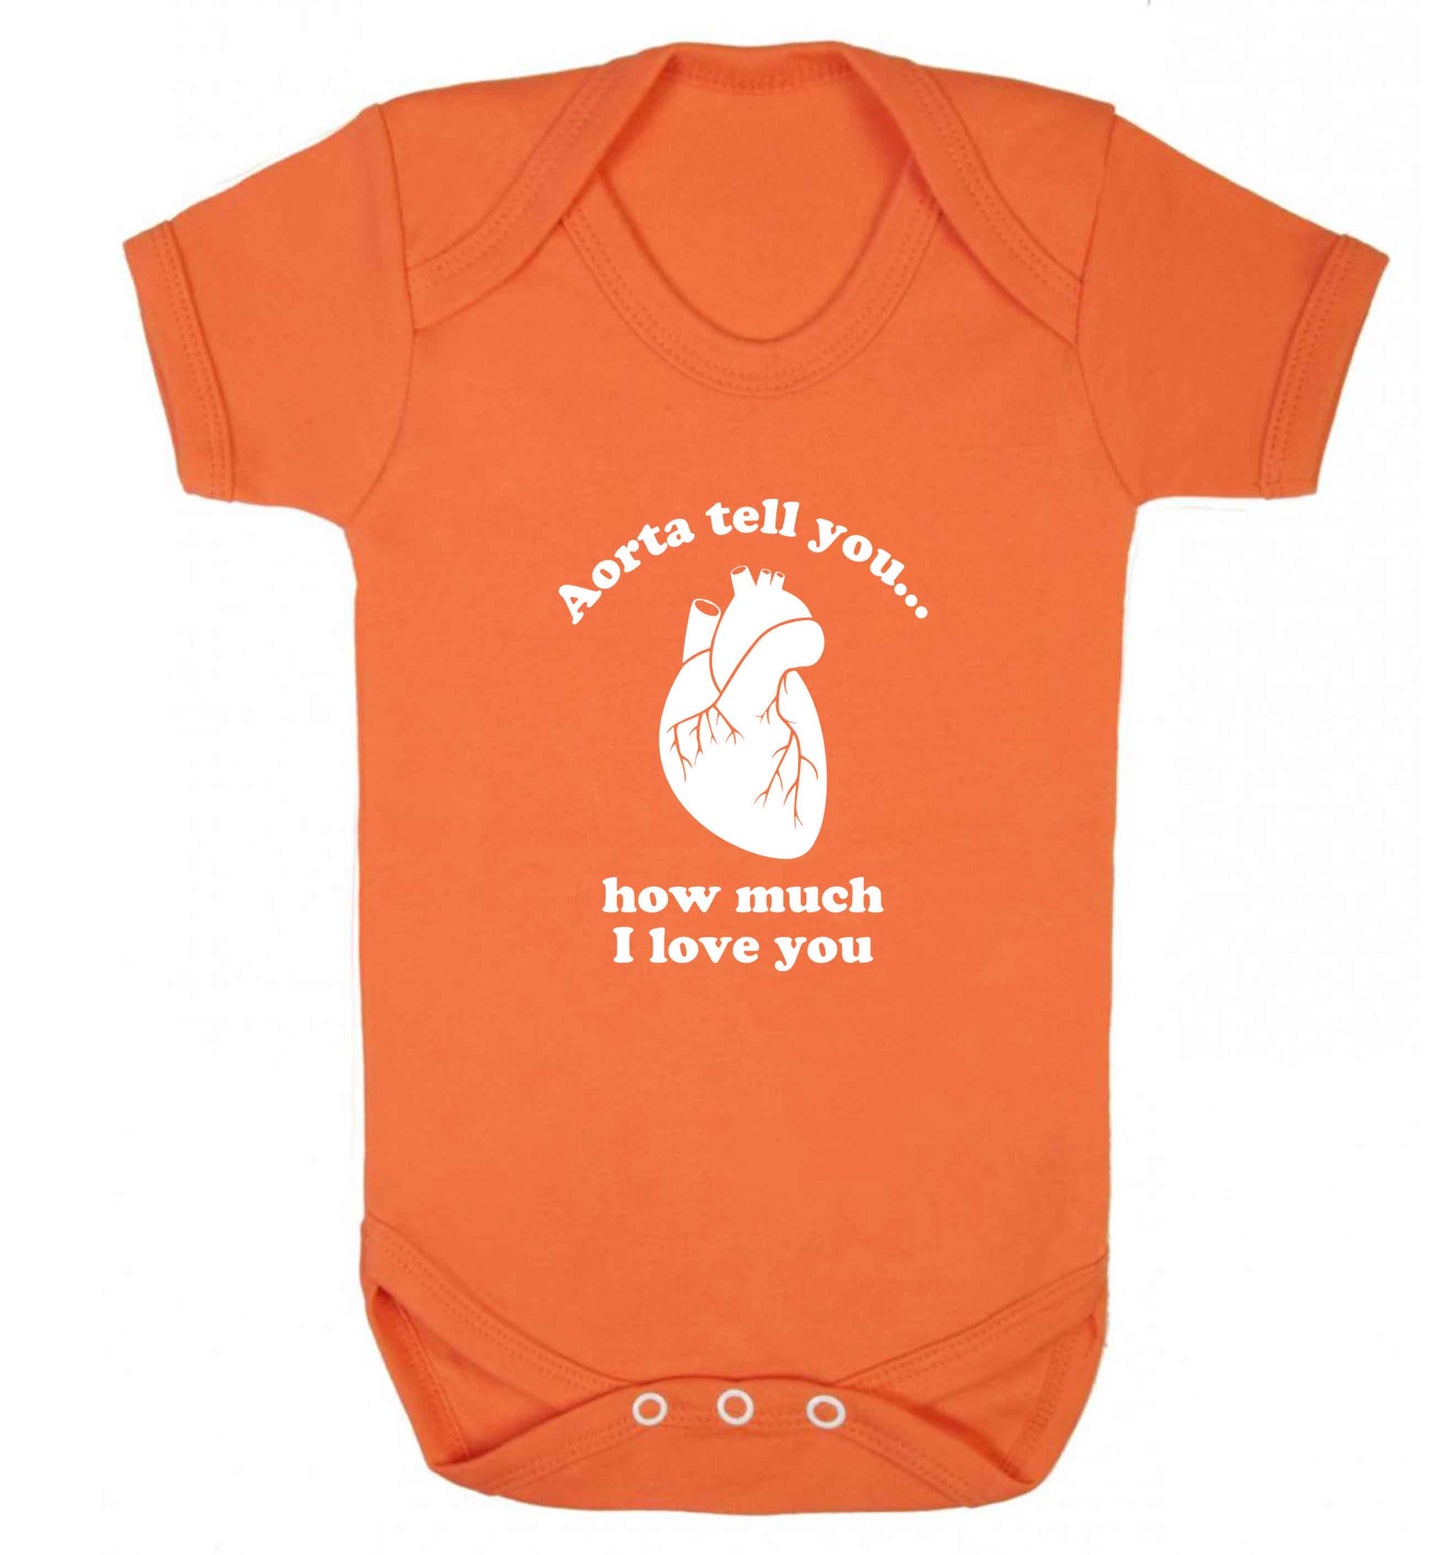 Aorta tell you how much I love you baby vest orange 18-24 months